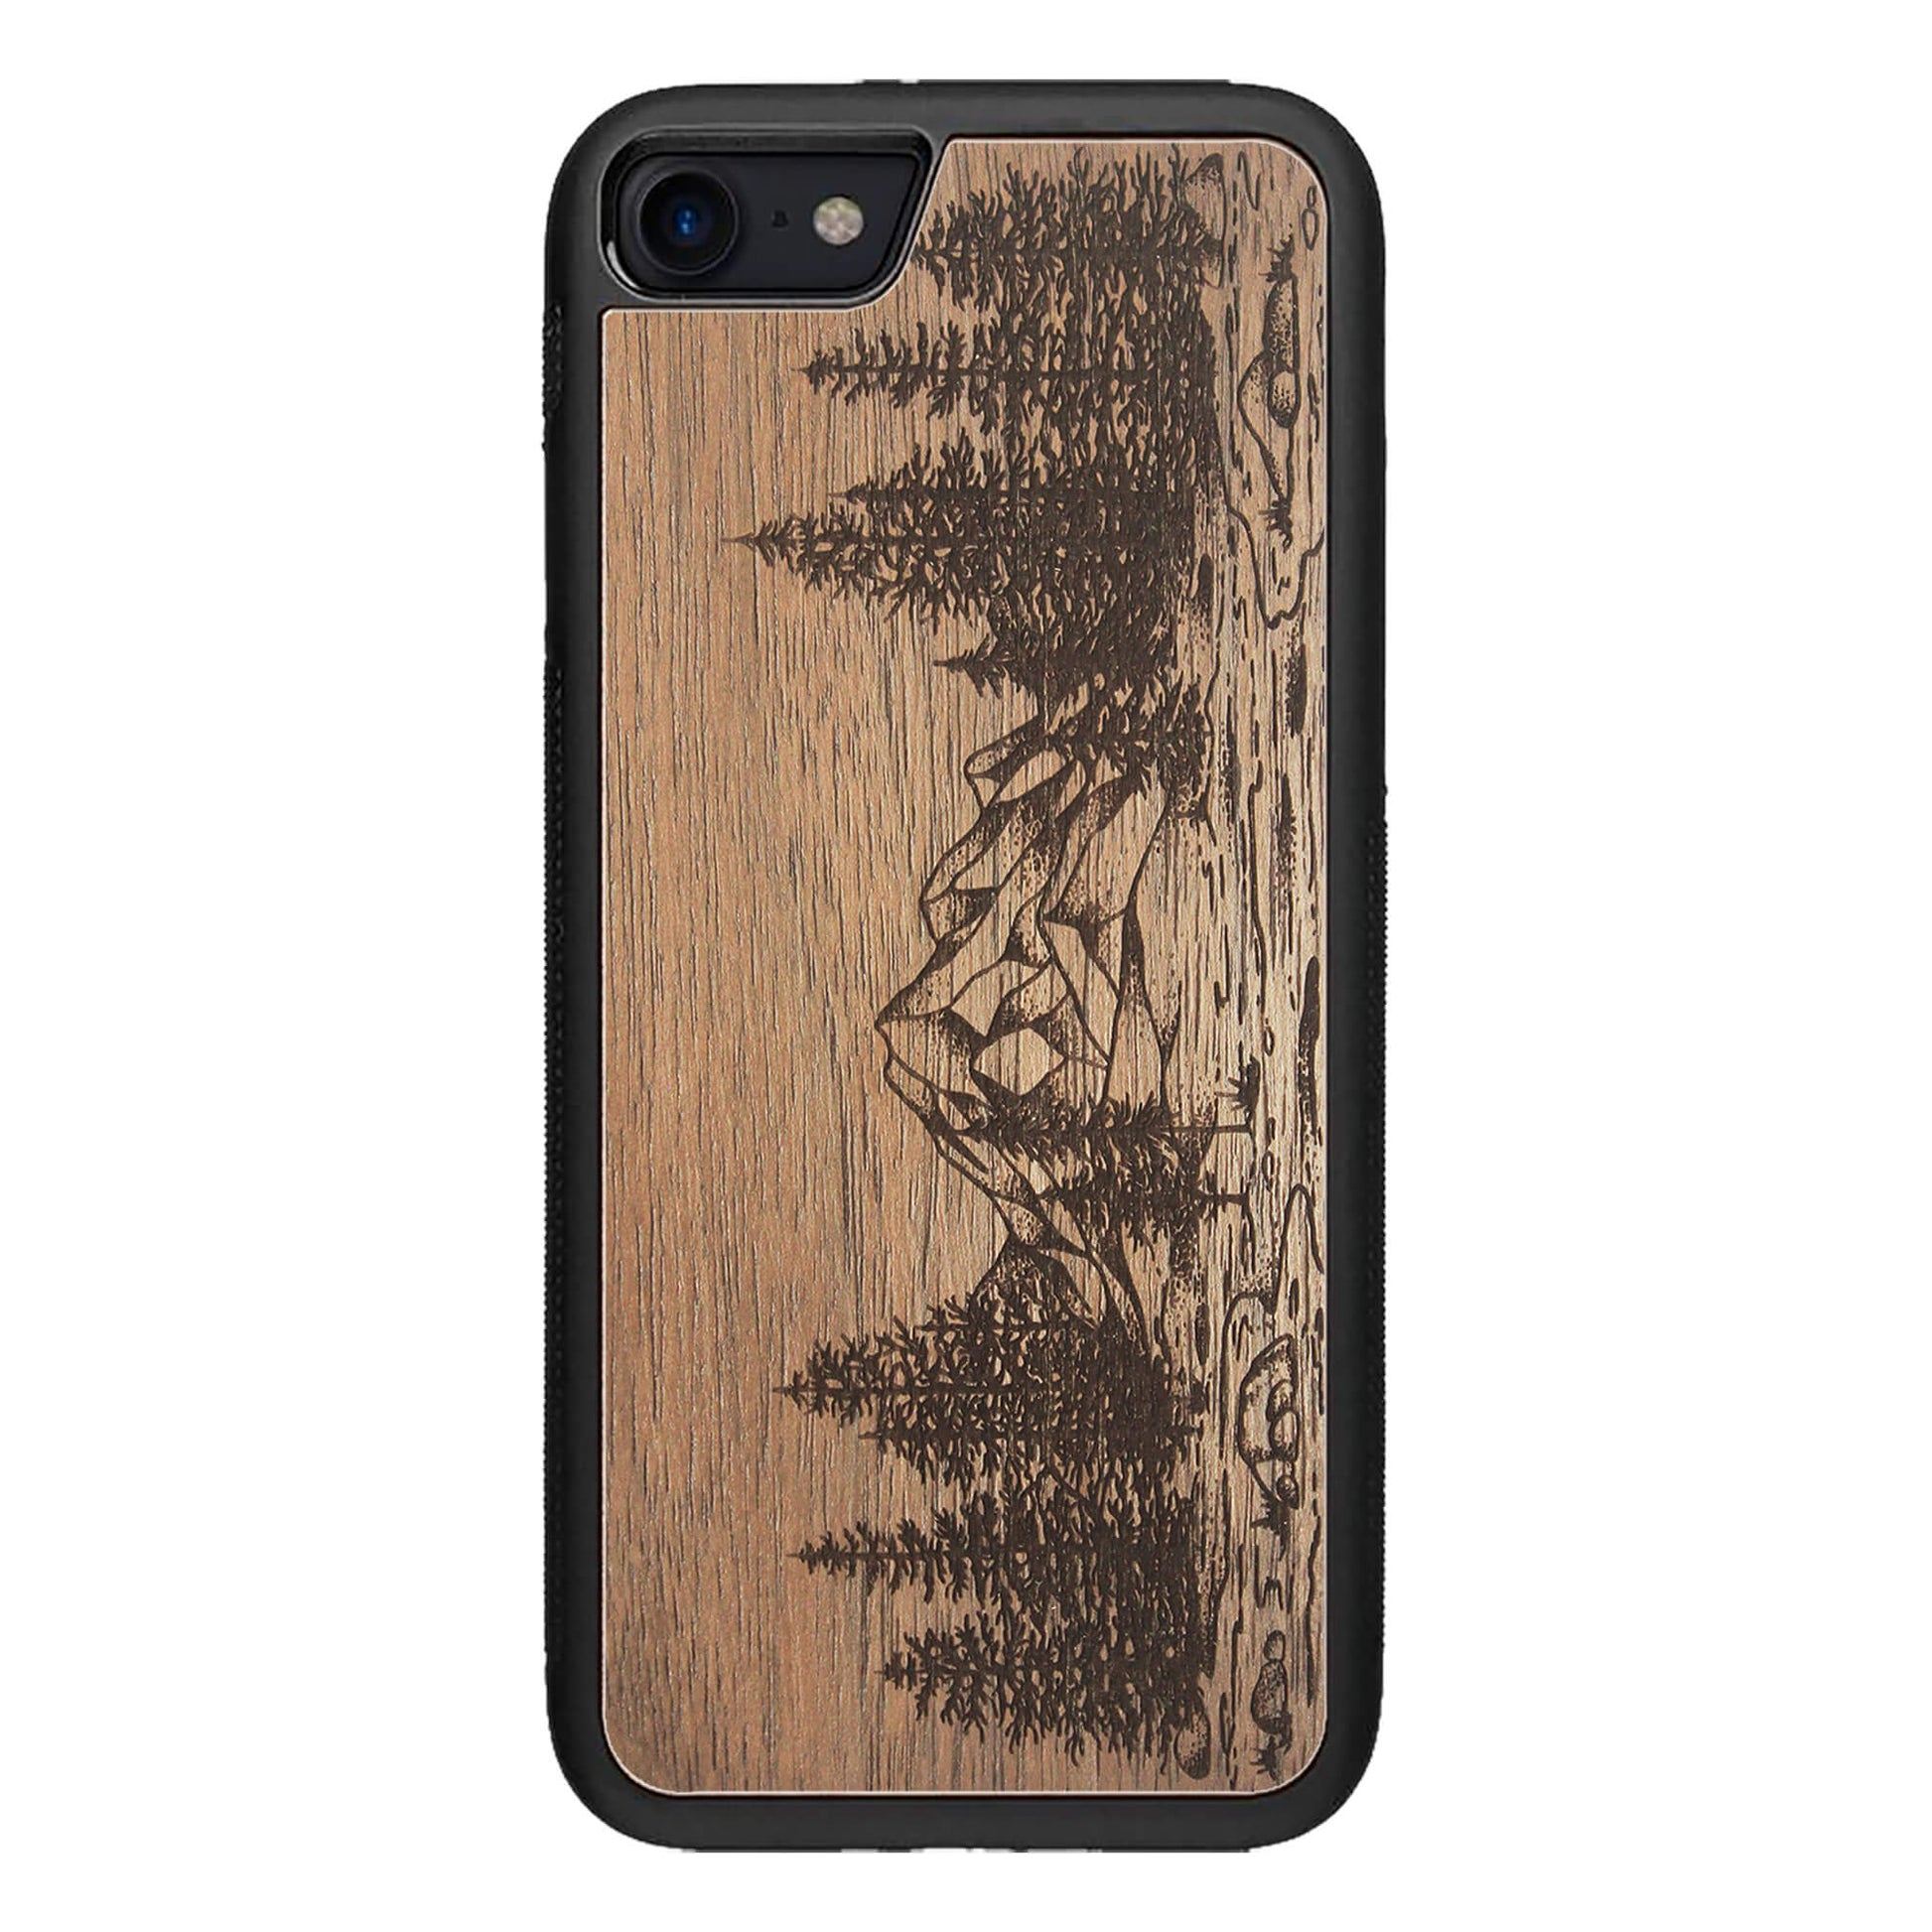 Wooden Case for iPhone SE 3 generation case Nature